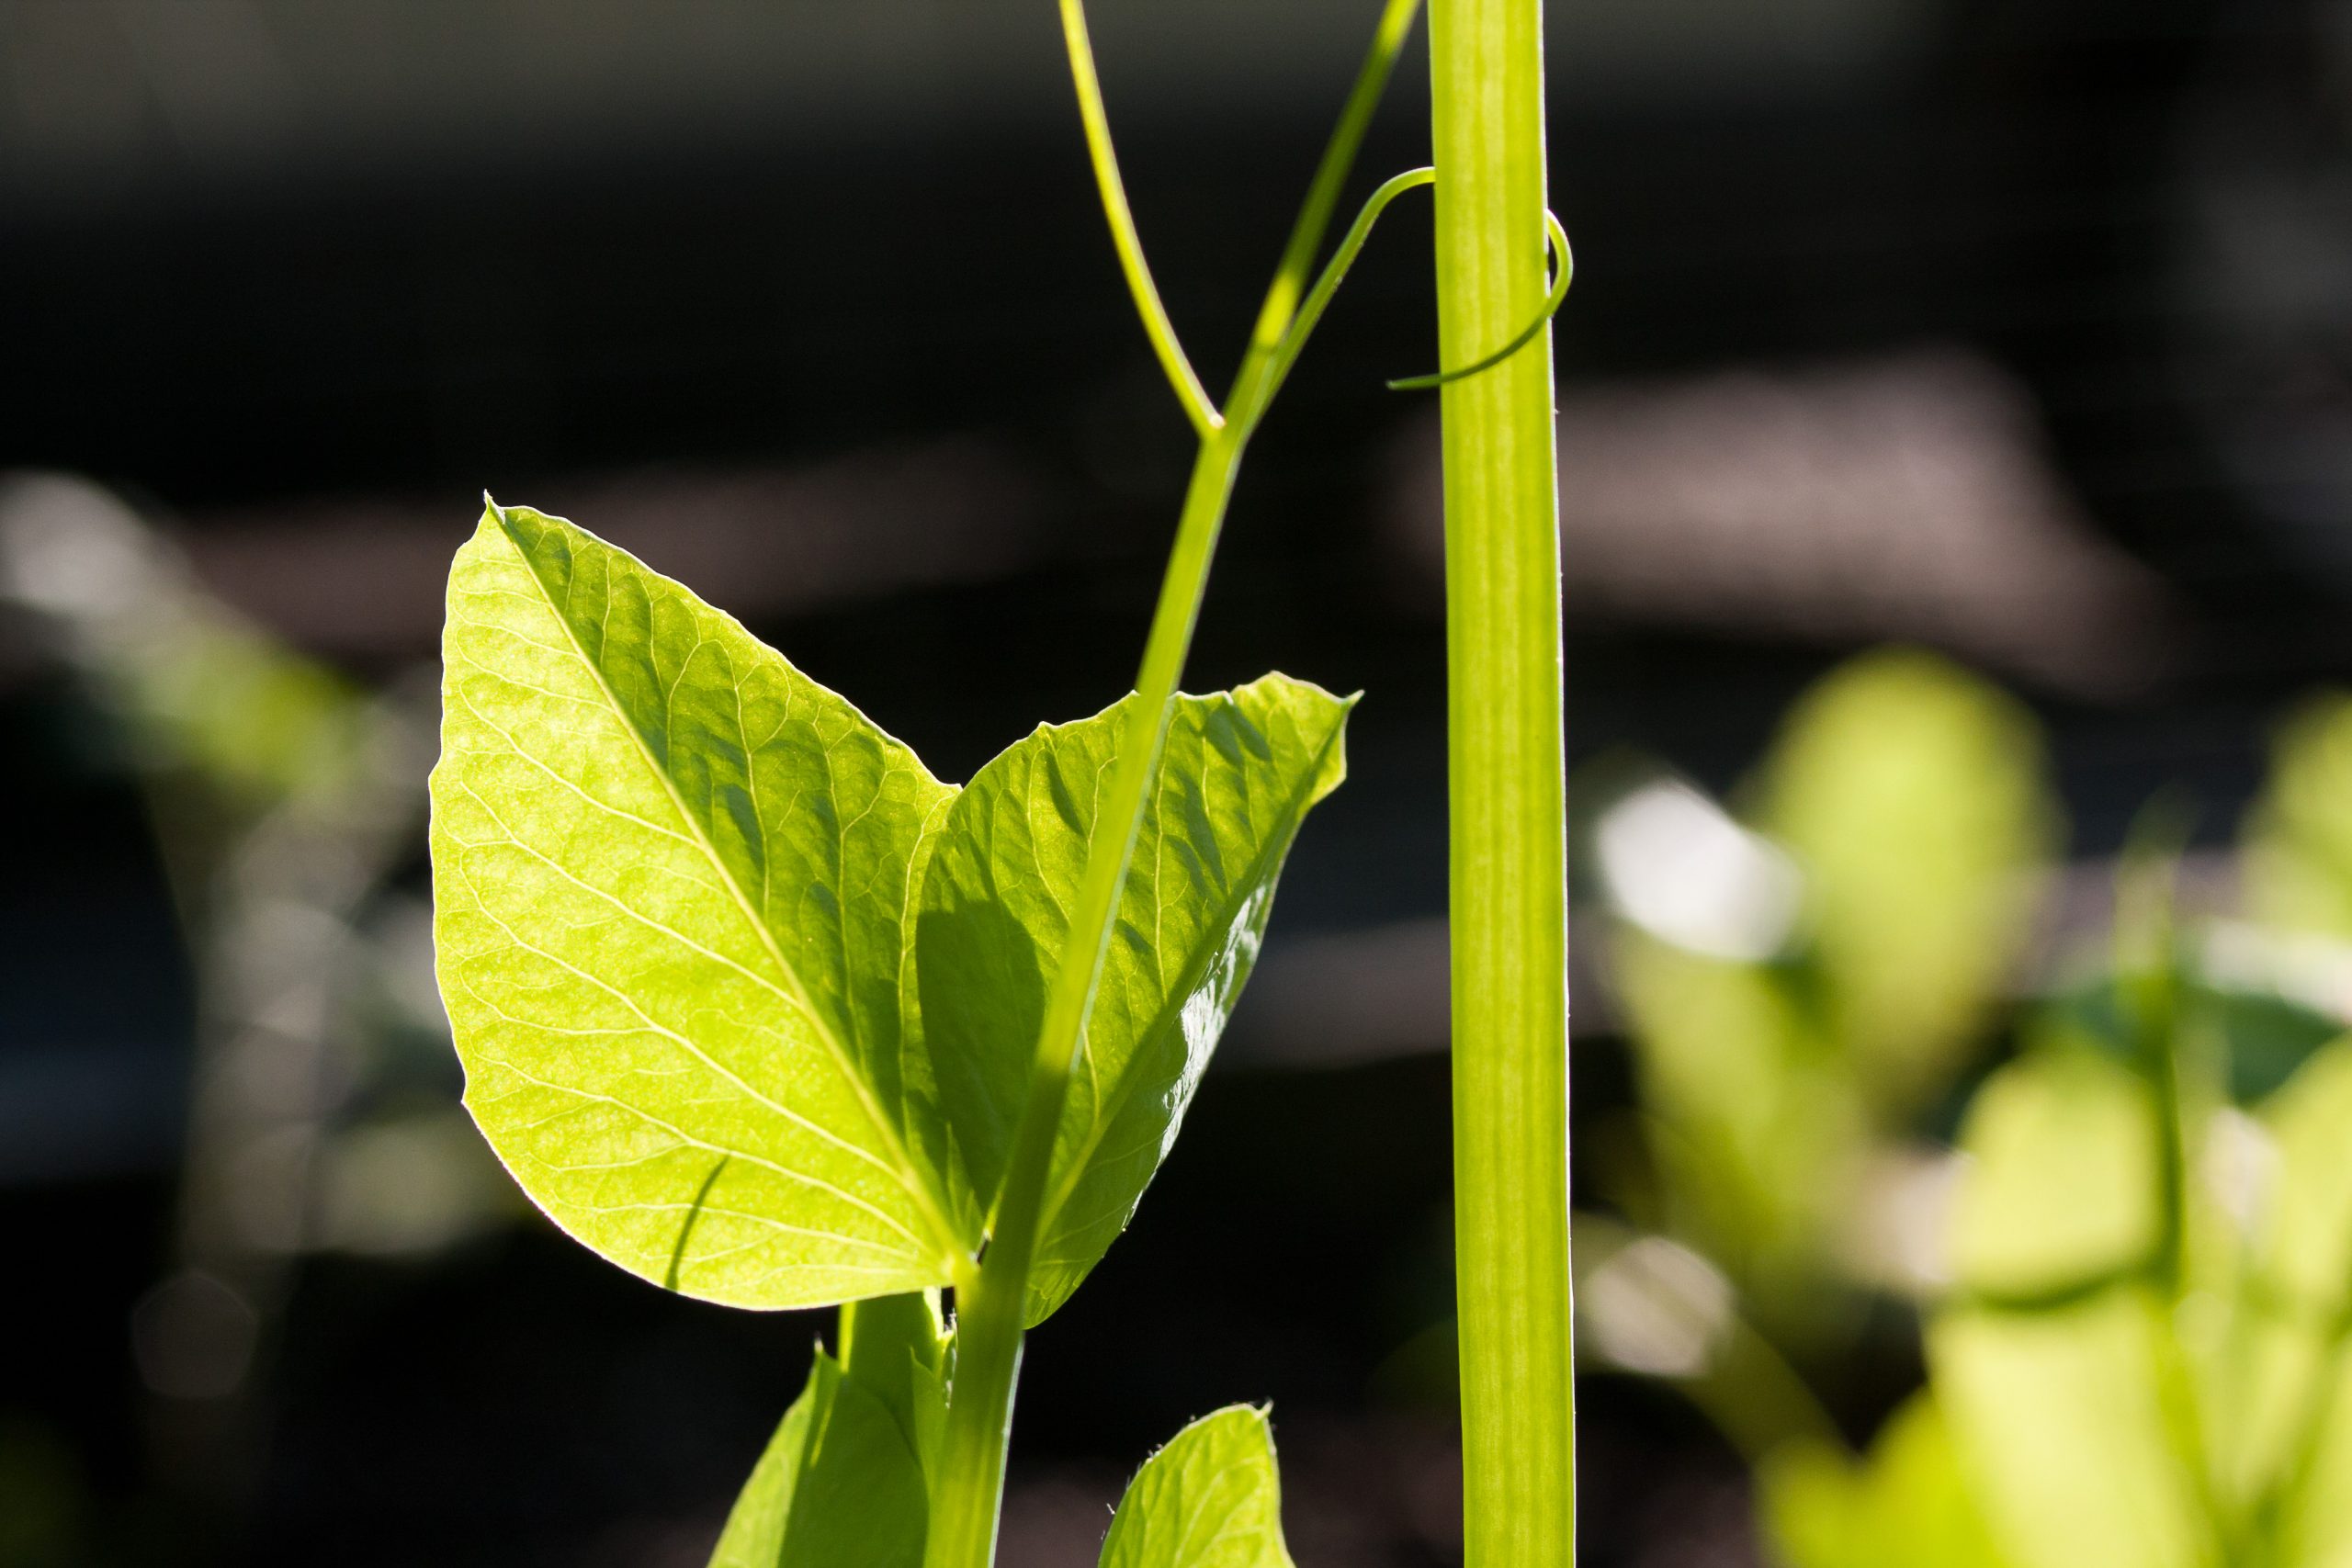 Sunlight powers the growth of all plants, including this pea seedling, which is why gardens do best in sunny locations.